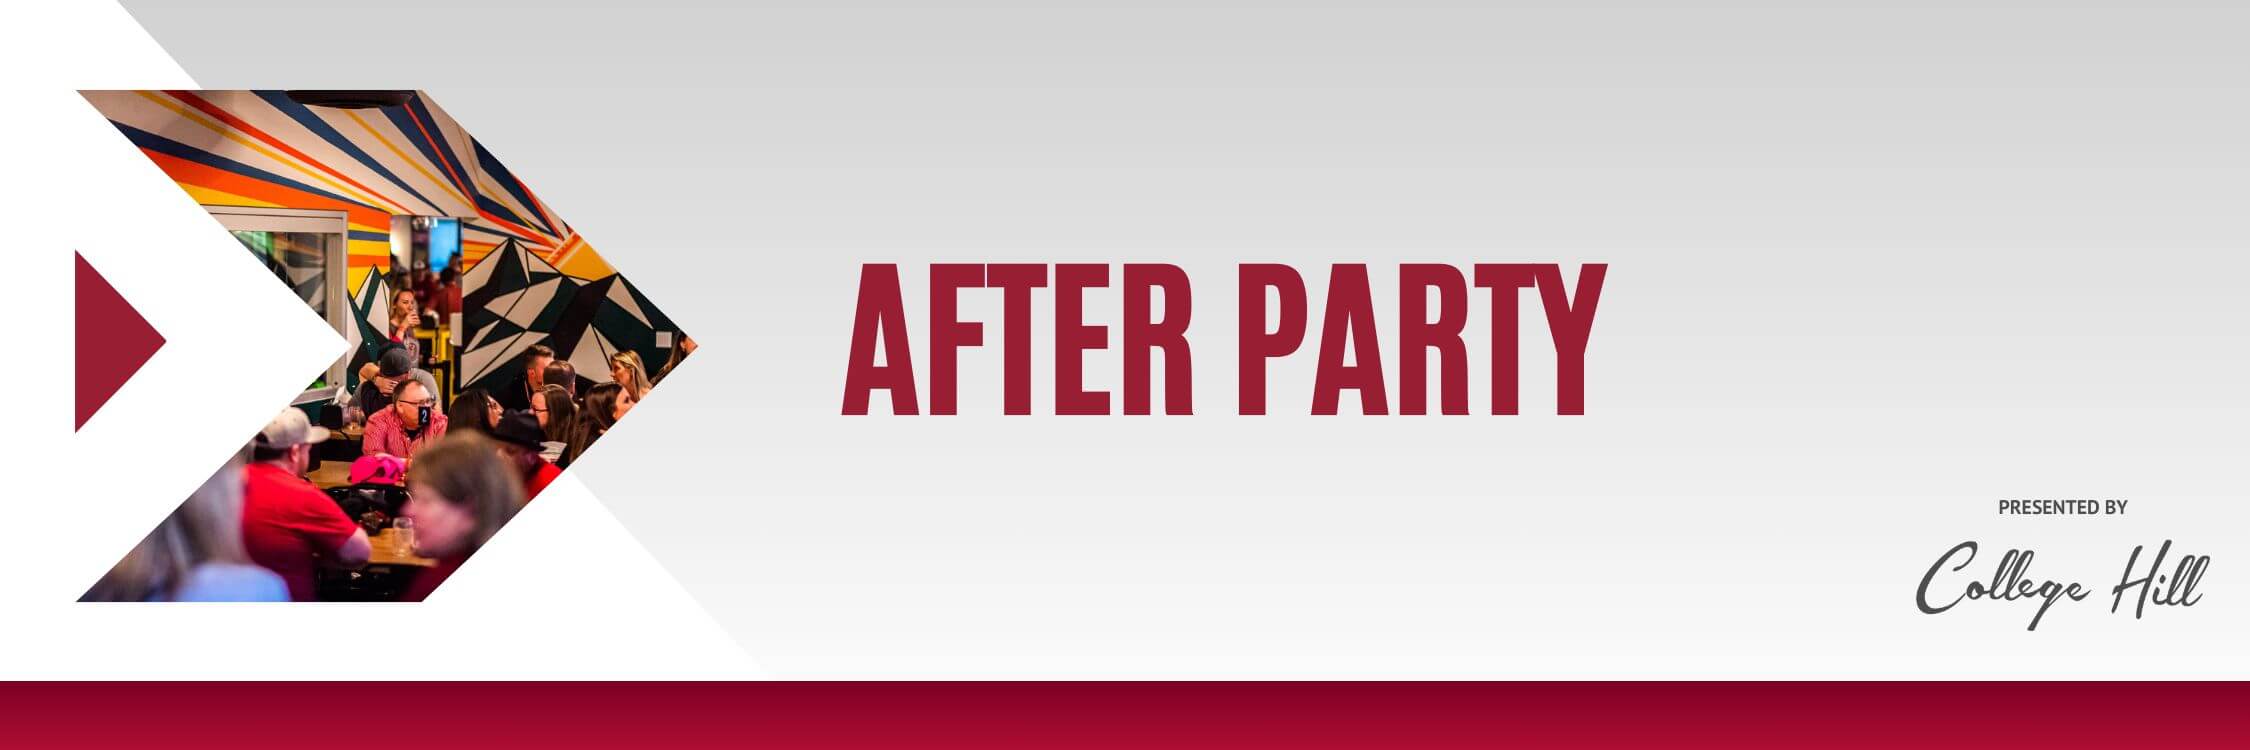 AfterParty_1500x500